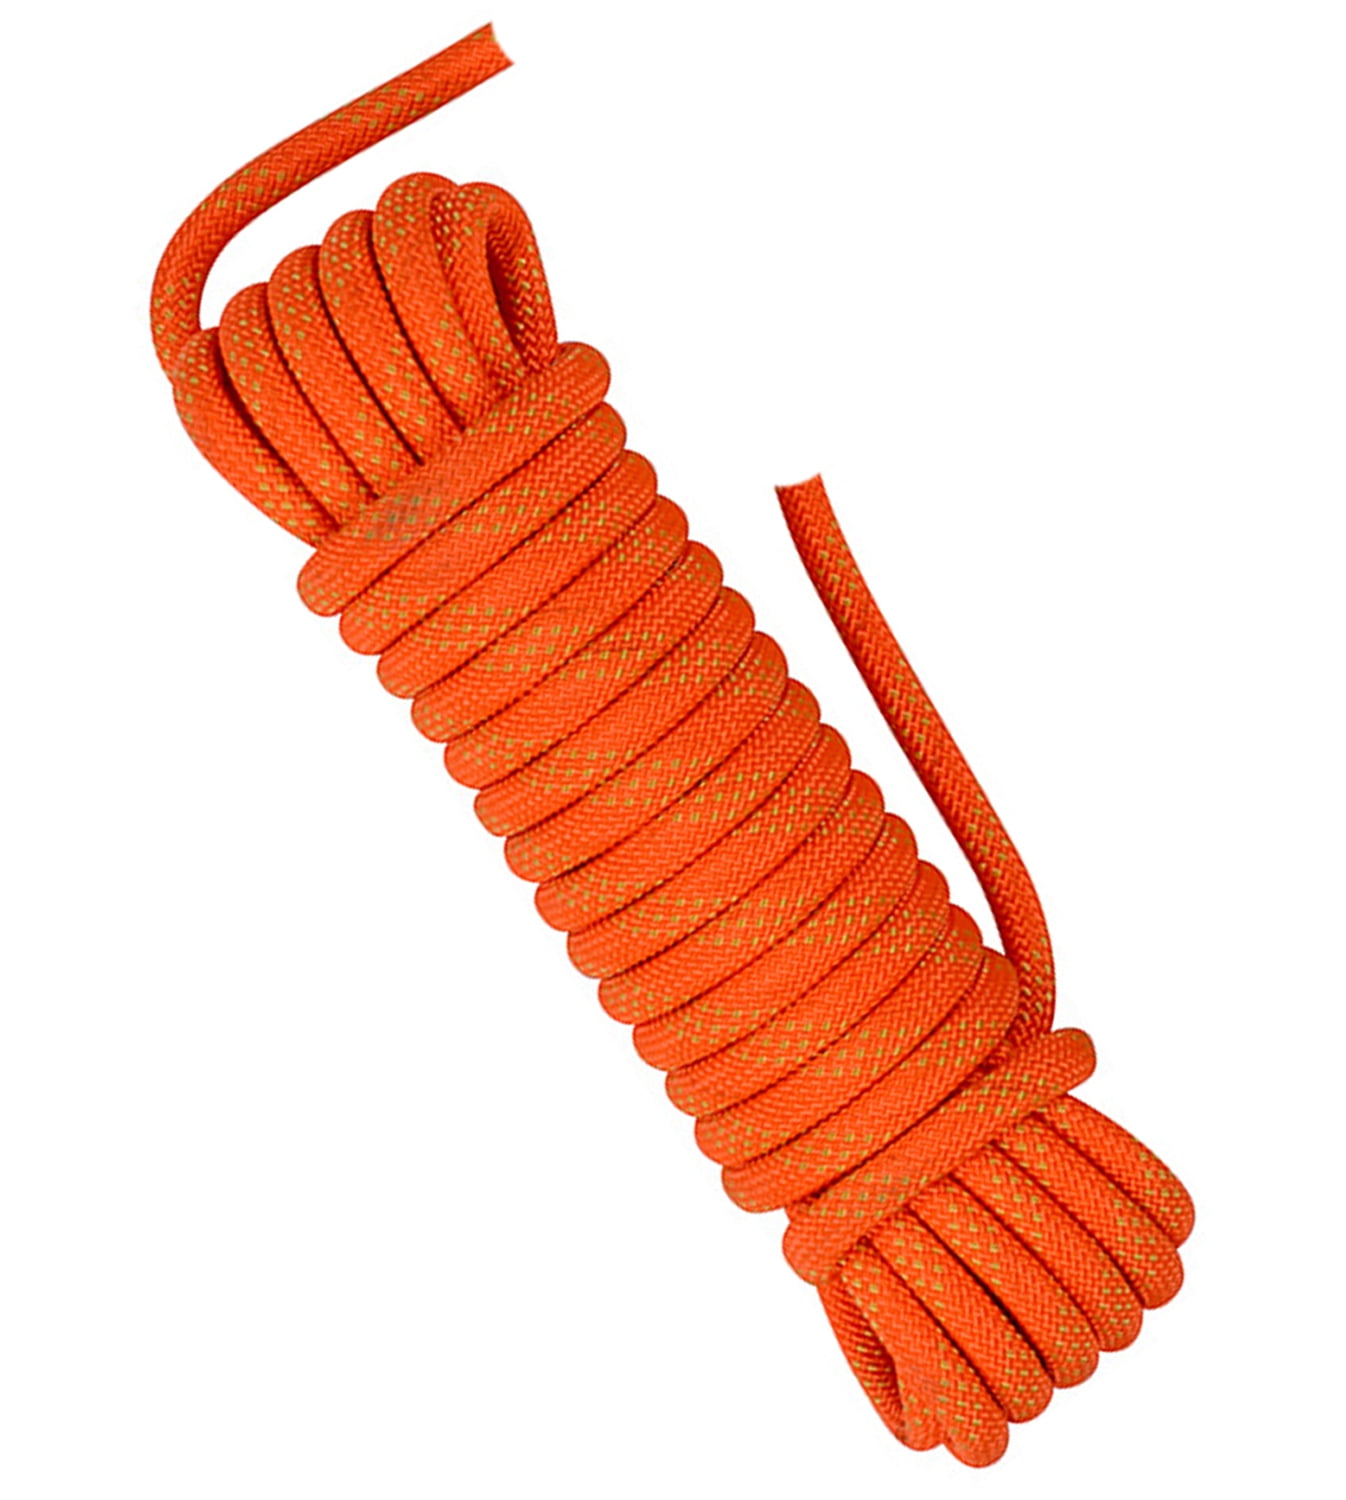 NorthPada High Strength Polyester Rope Arborist Bull Rope, Static Safety  Rock Climbing Rope, Fire Rescue Escape Rope, Tree Cutting/ClimbingRope,  Hoist Rigging Line 98 FT 3/8 inch Orange 